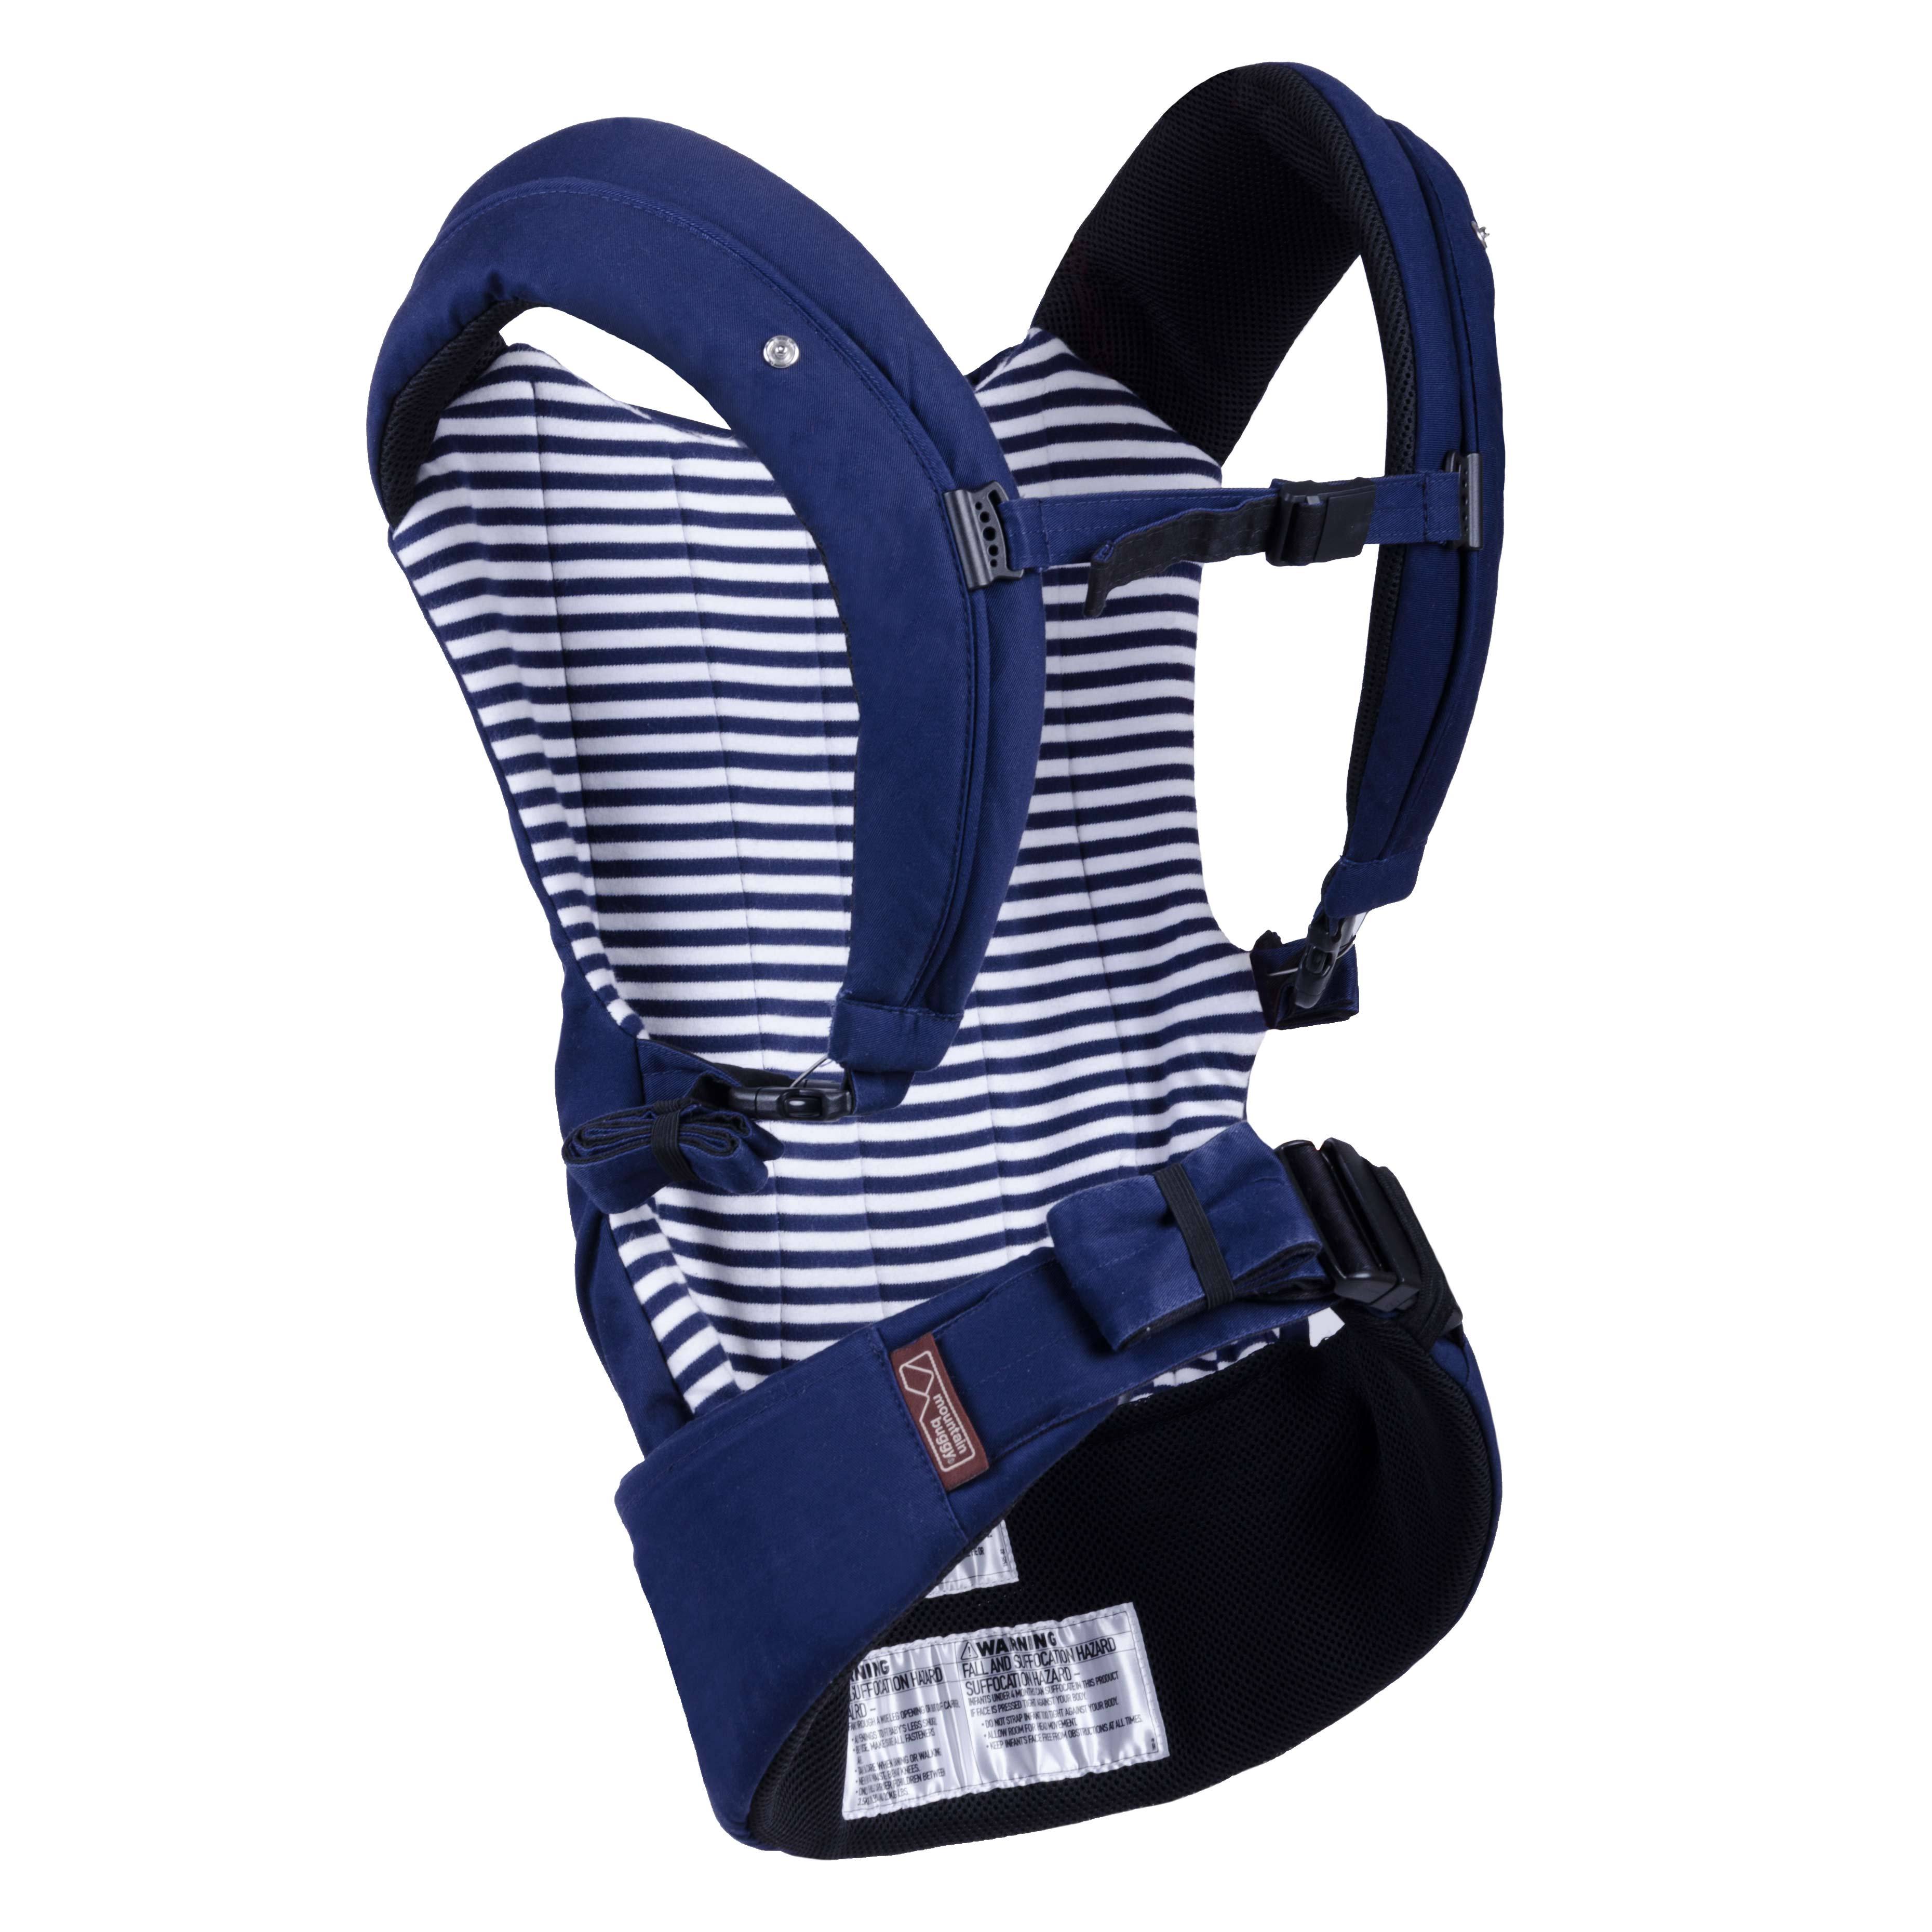 mountain buggy juno baby carrier